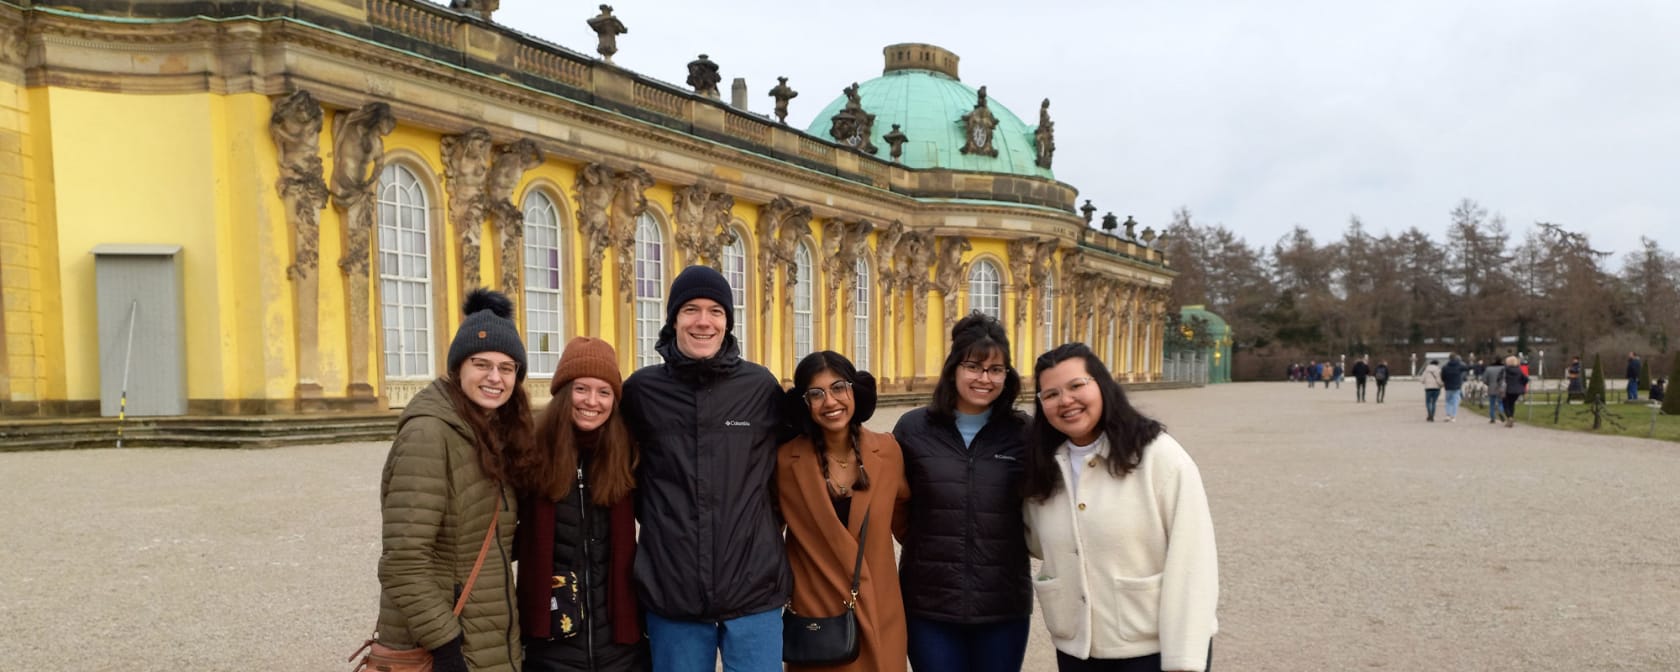 AIFS students in Berlin, Germany, visit a palace.